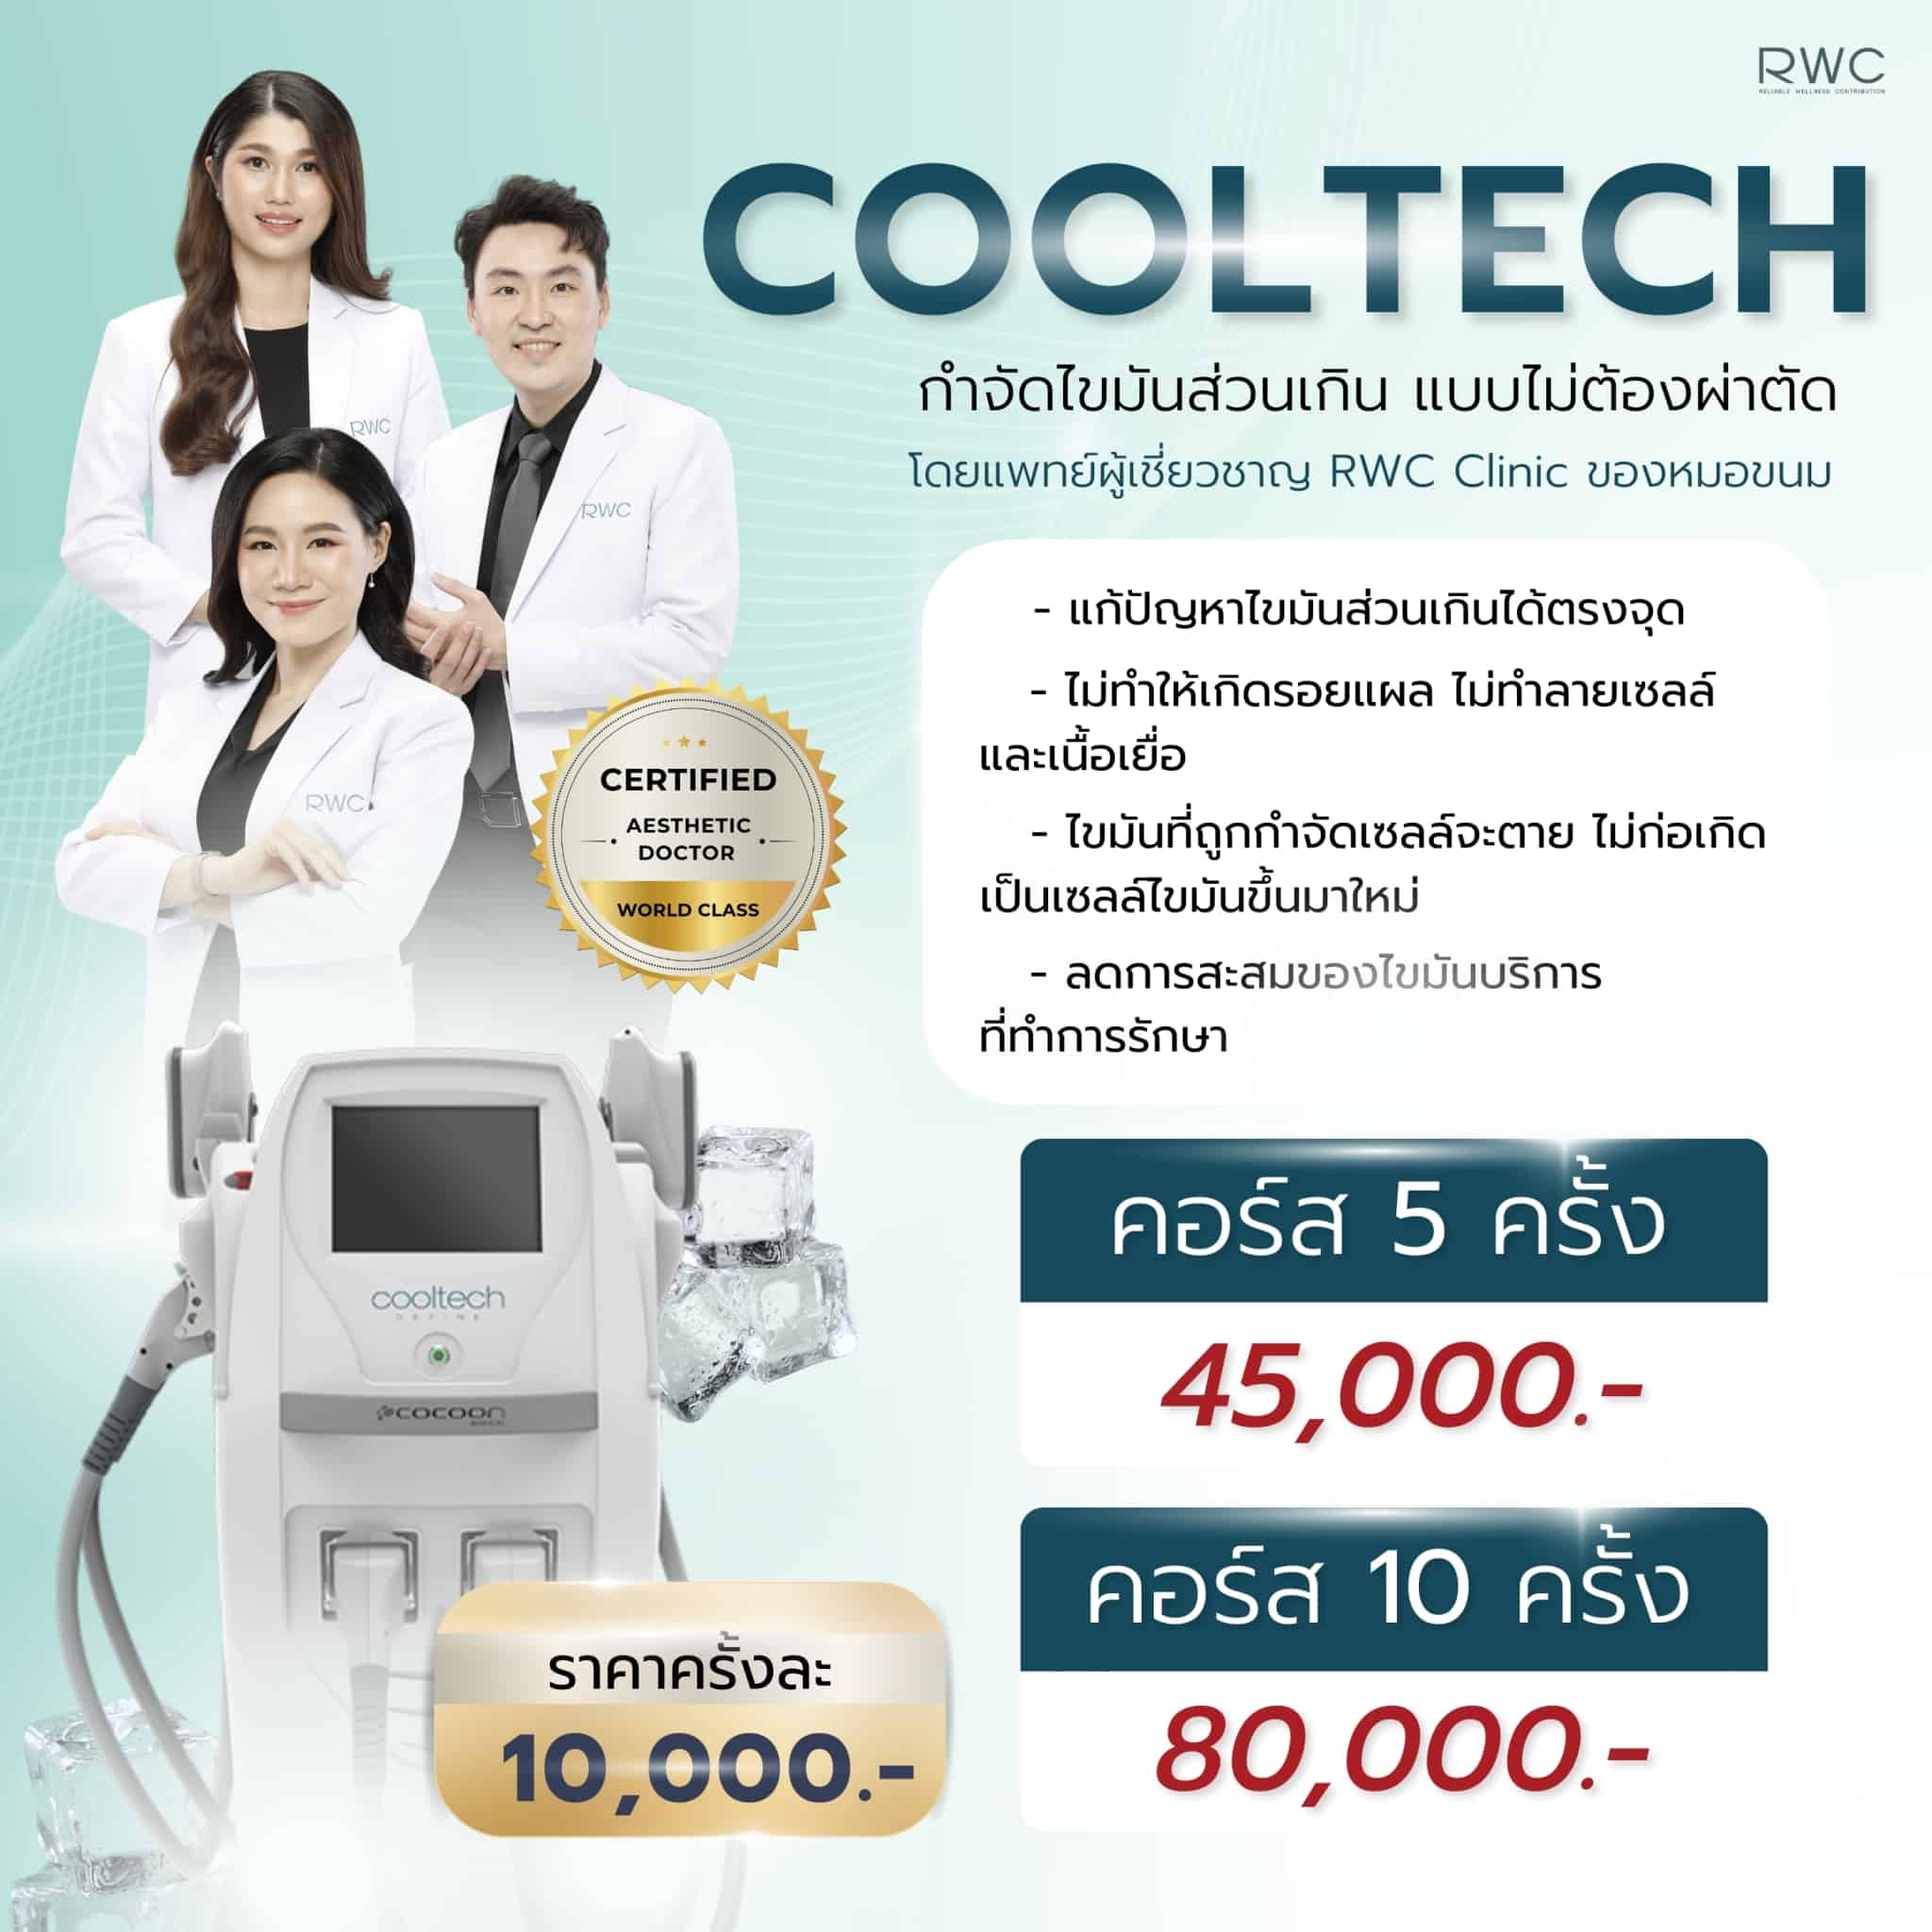 cooltech price